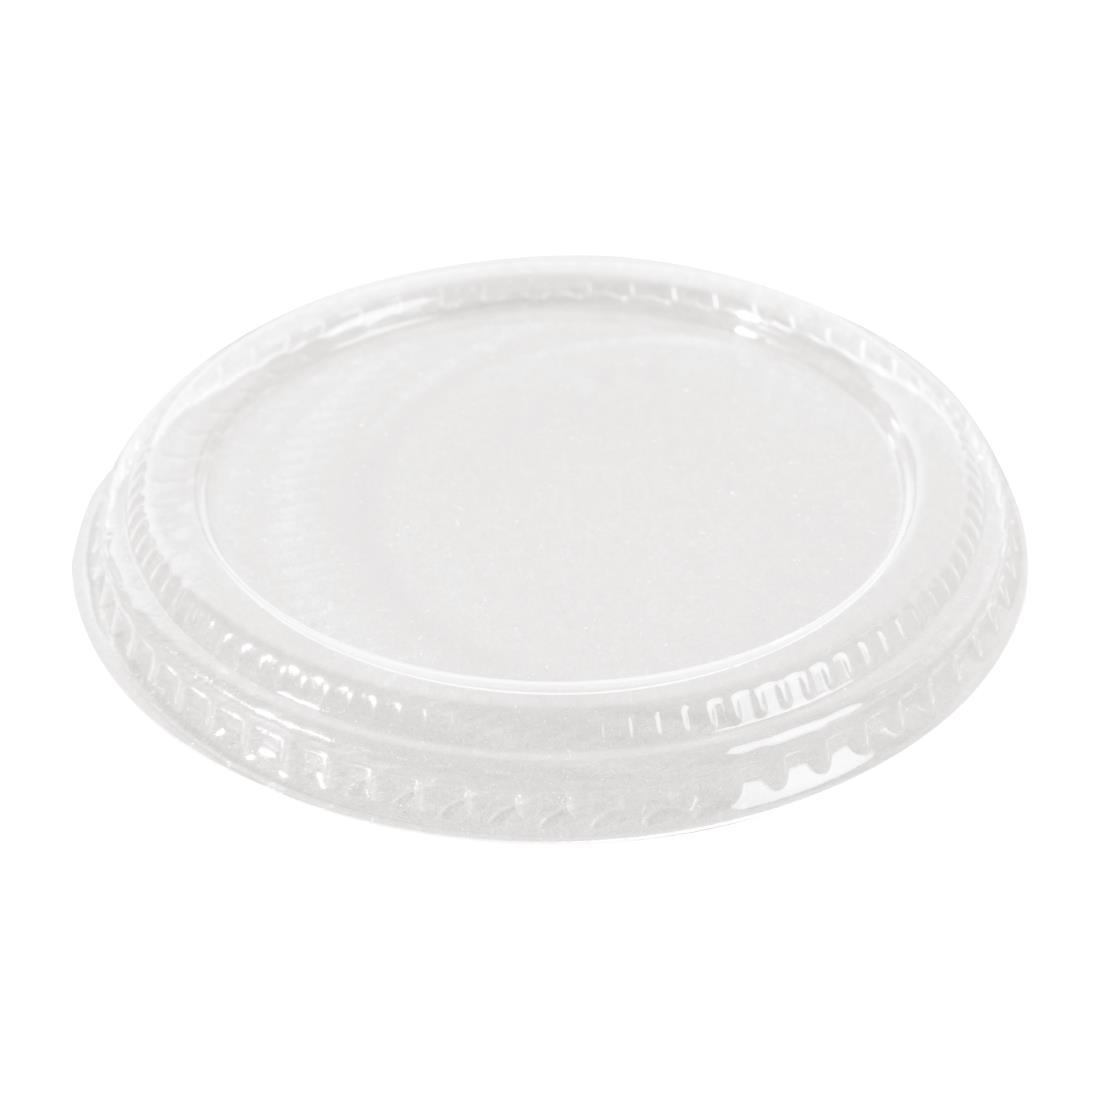 Solia PLA Lids for Round Container 180ml (Pack of 50) - FC768  - 1